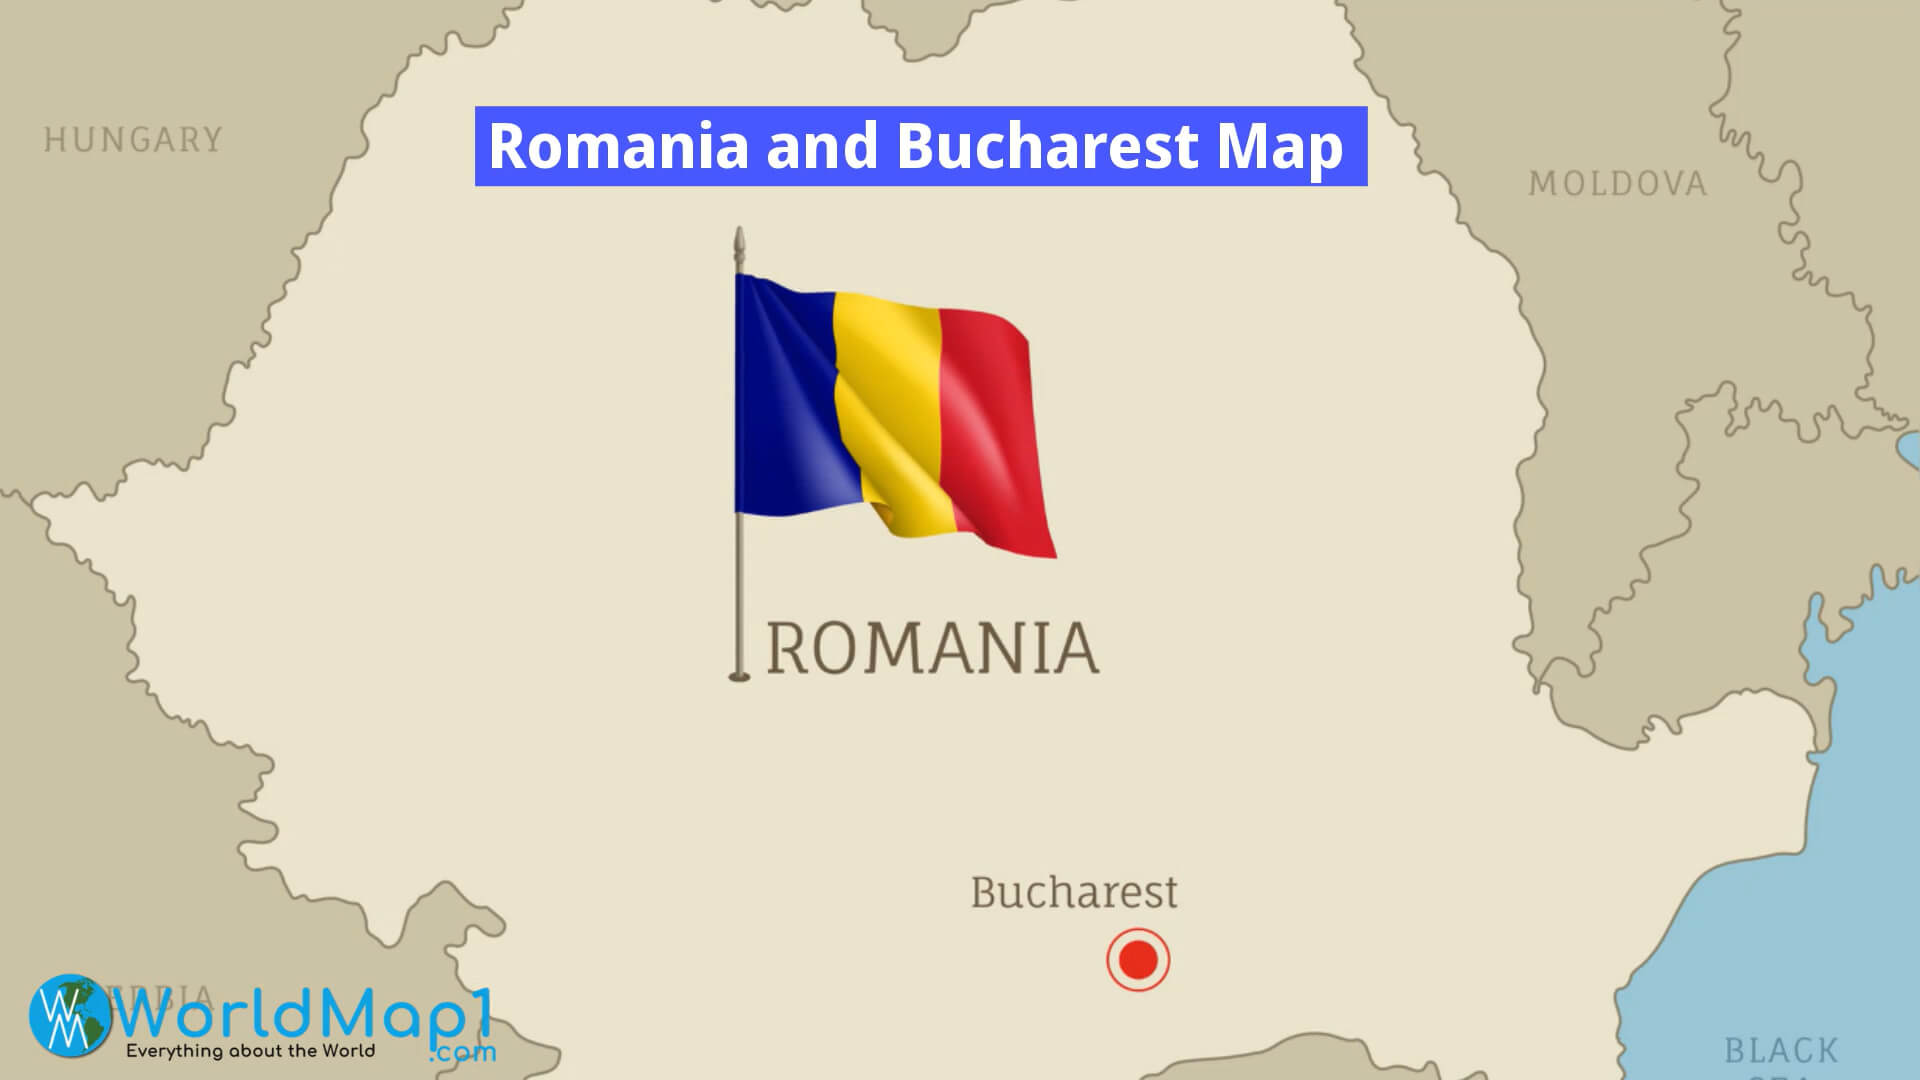 Romania and Bucharest Map